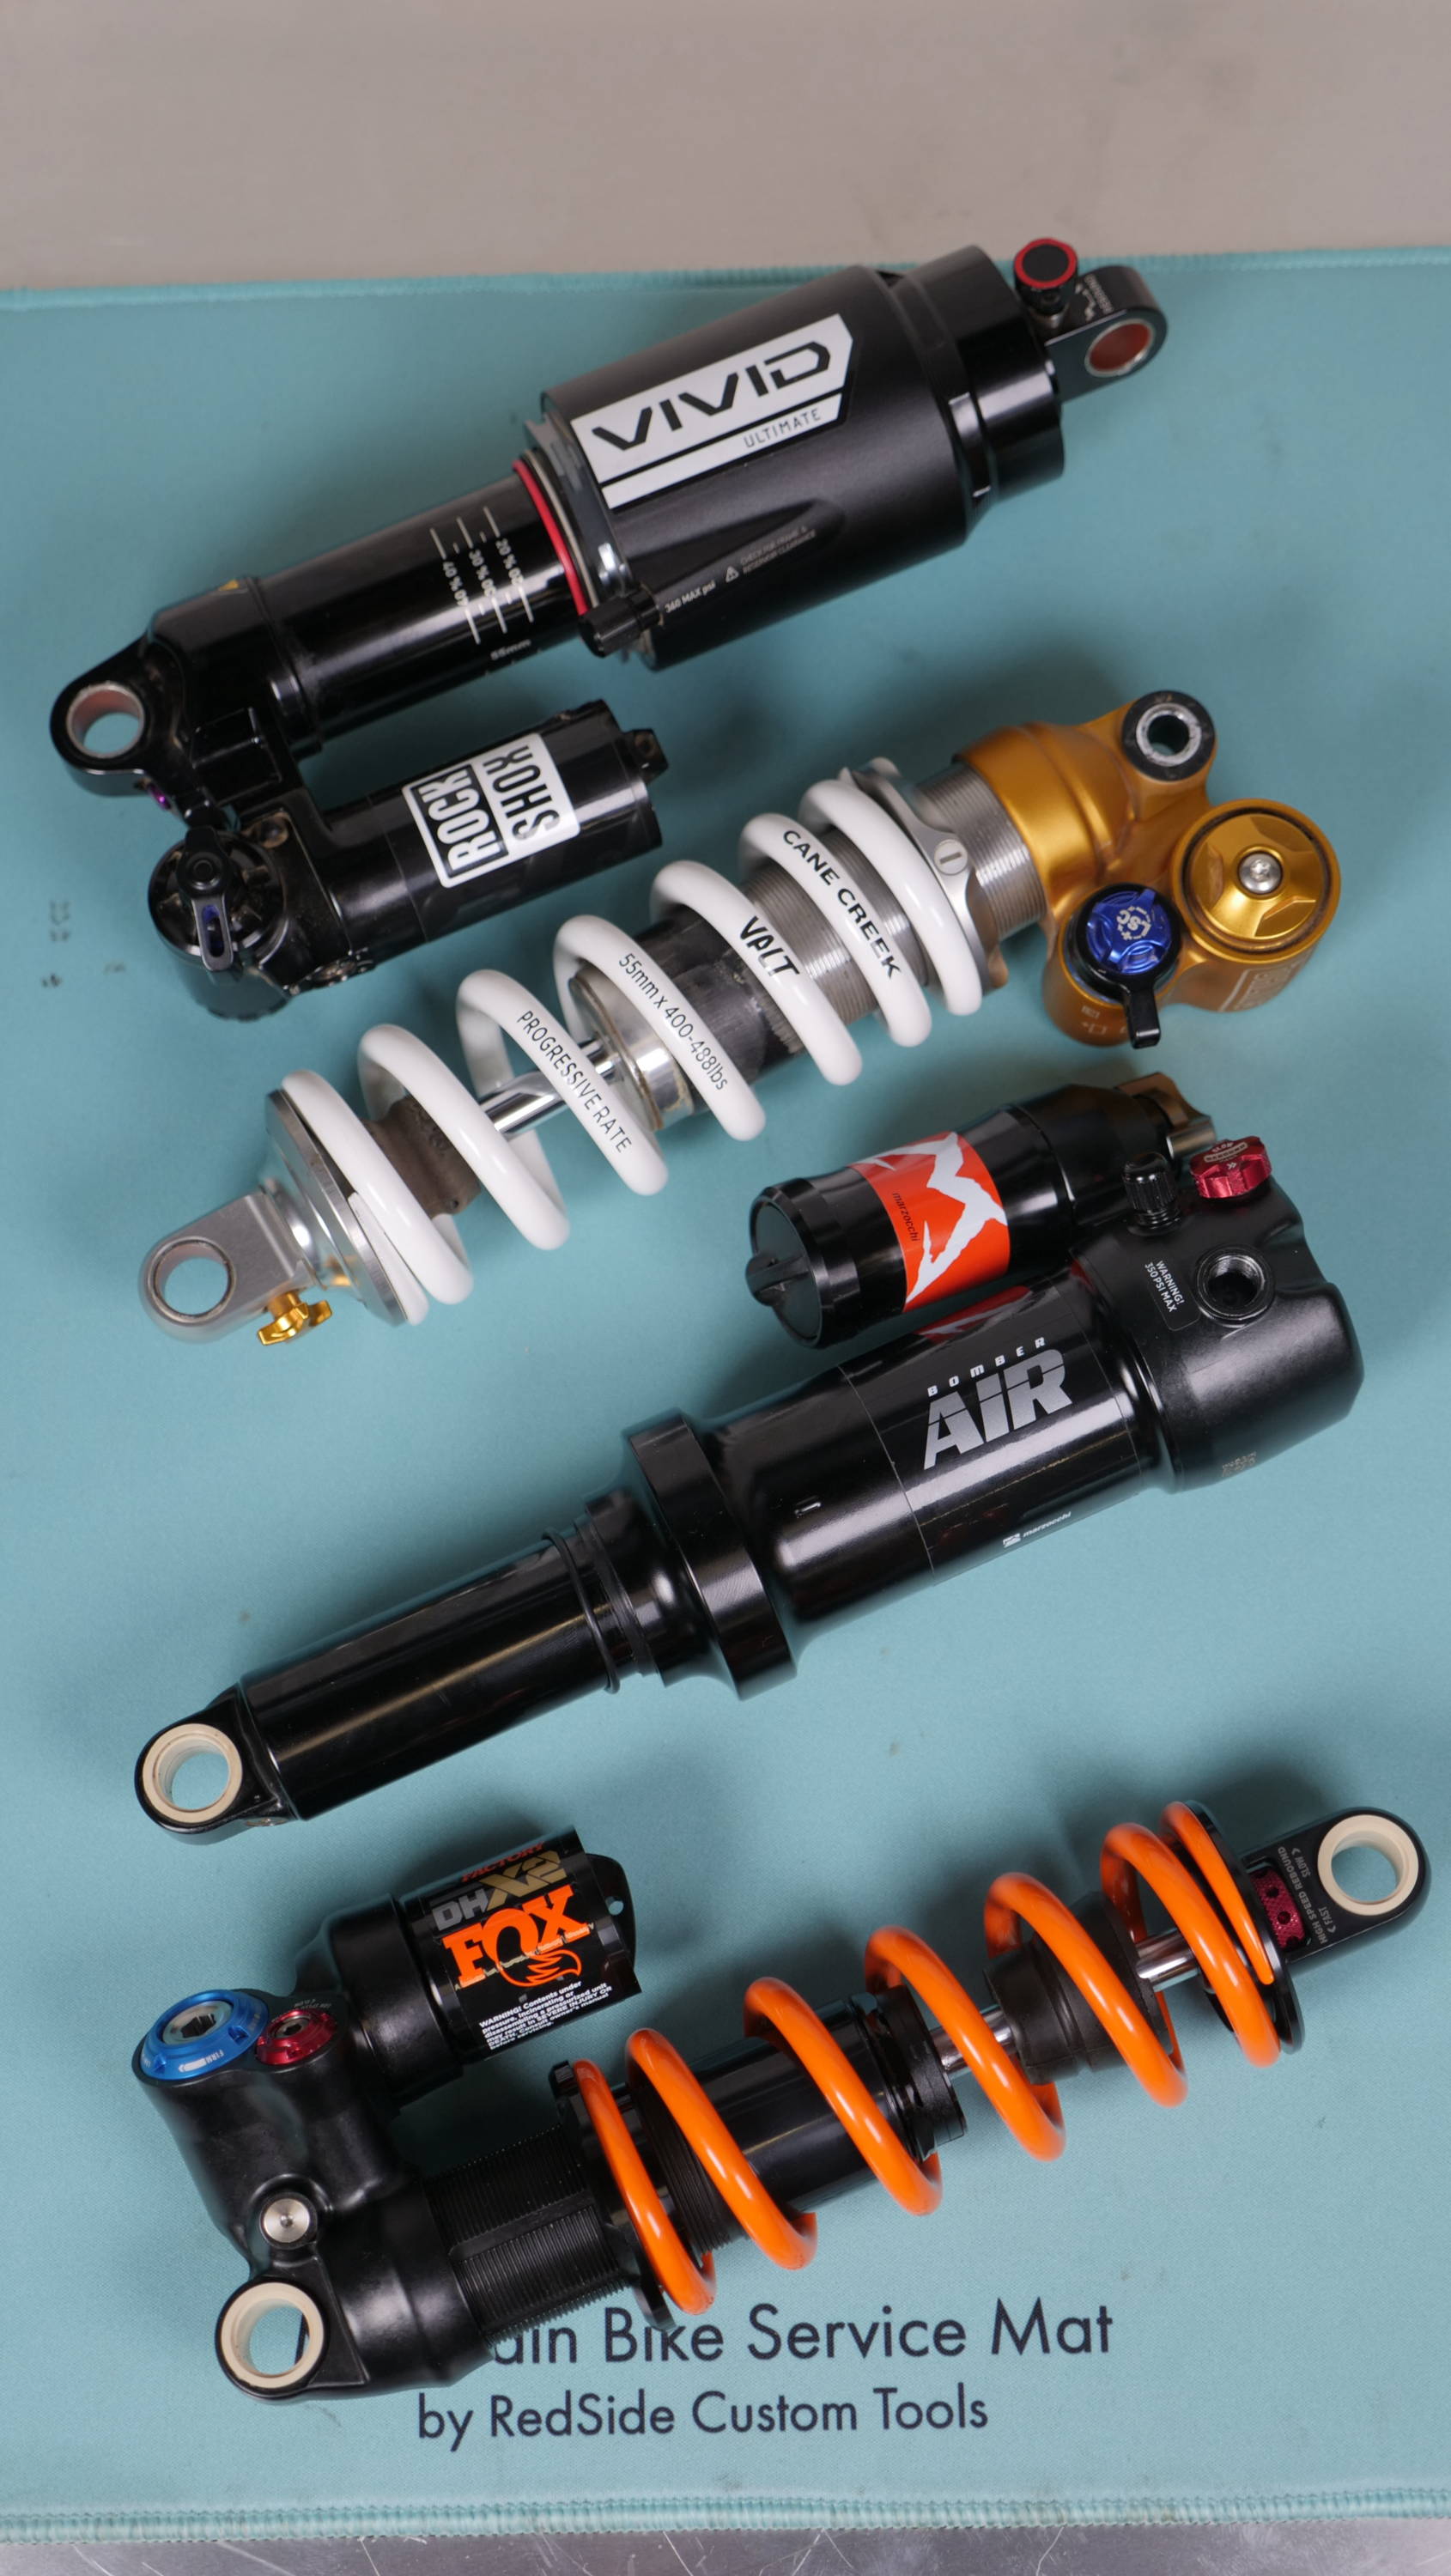 RockShox Vivid, Ohlins ttx22, Marzocchi Bomber Air, and Fox DHX2 sitting next to each other on a mat